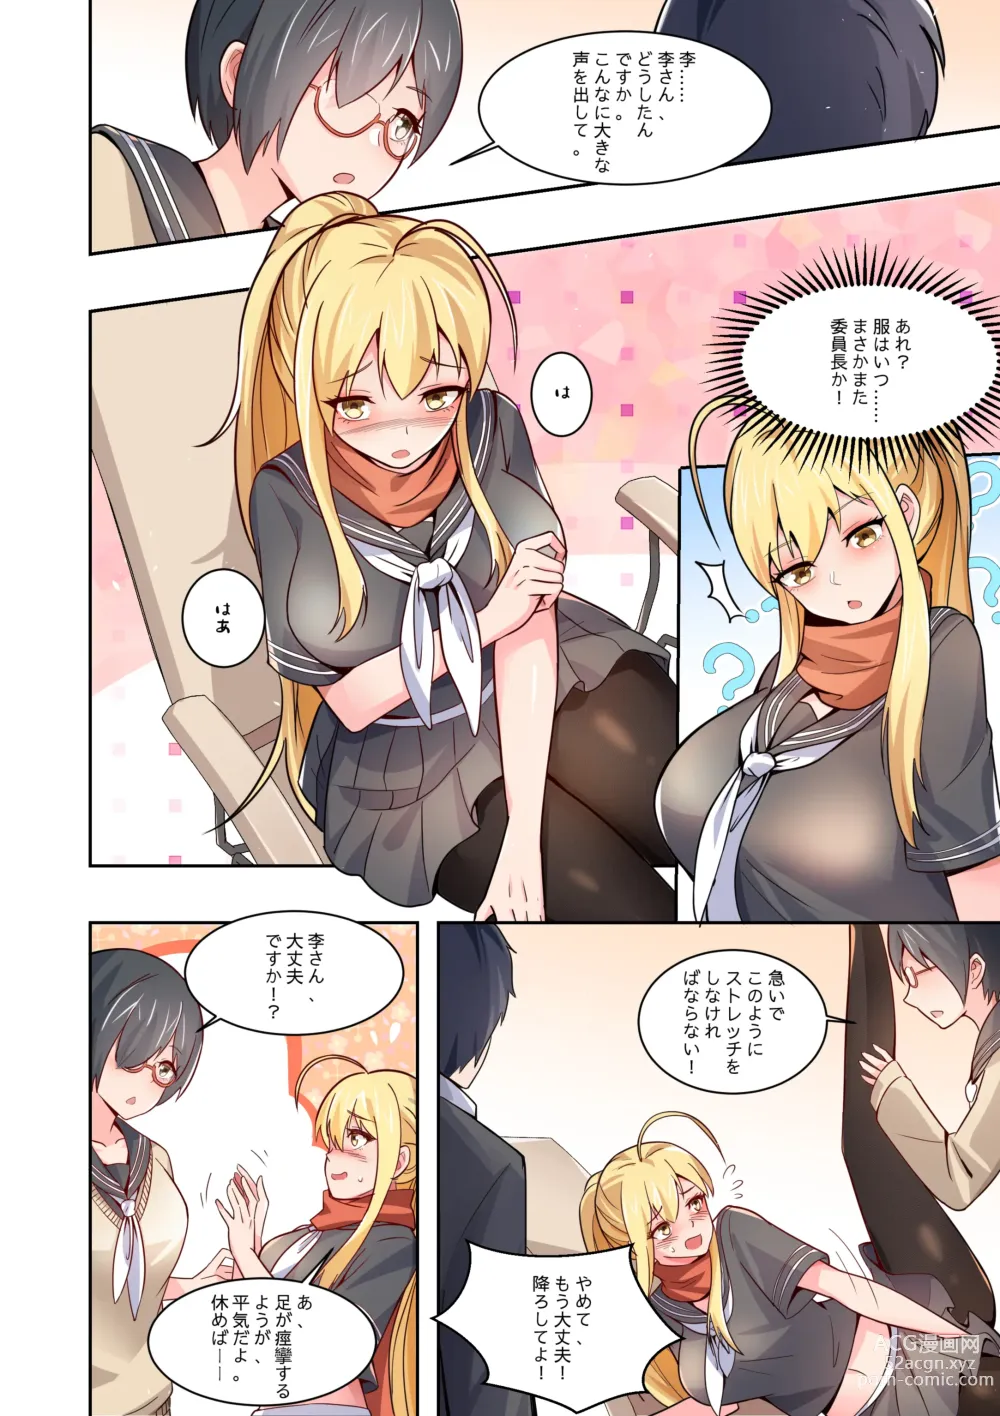 Page 20 of doujinshi ノーパン彼女